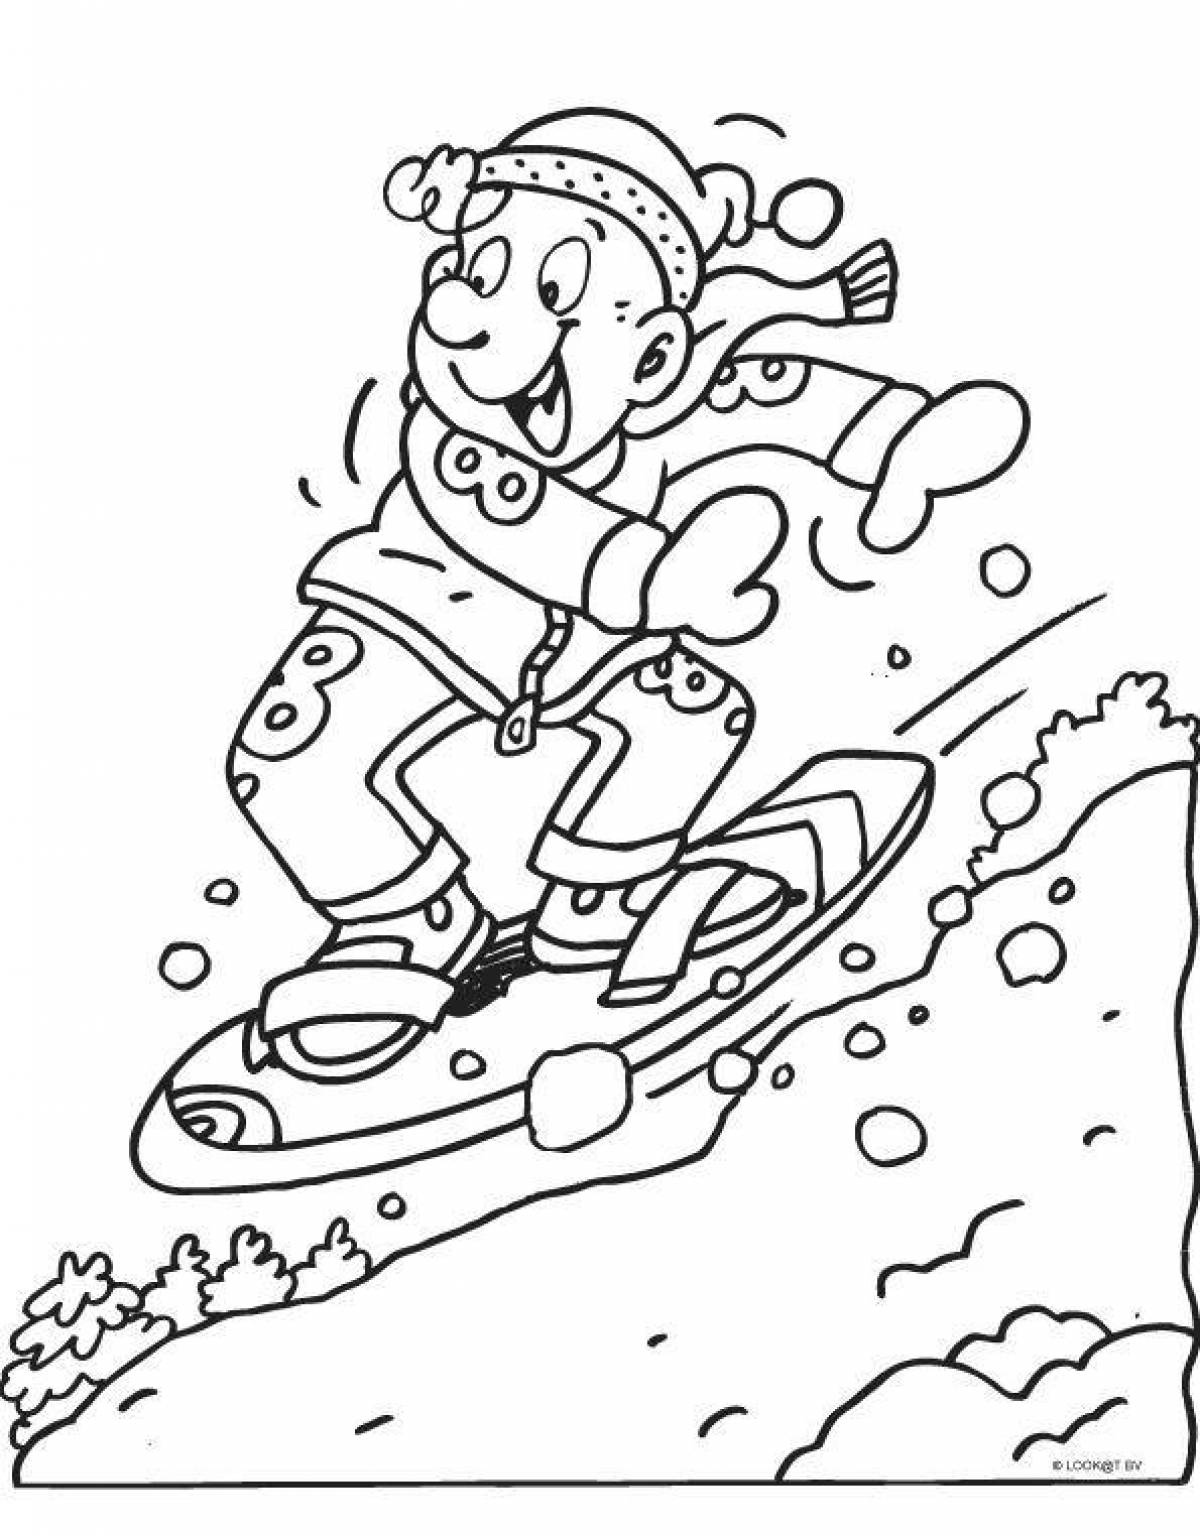 Children's winter sports coloring page